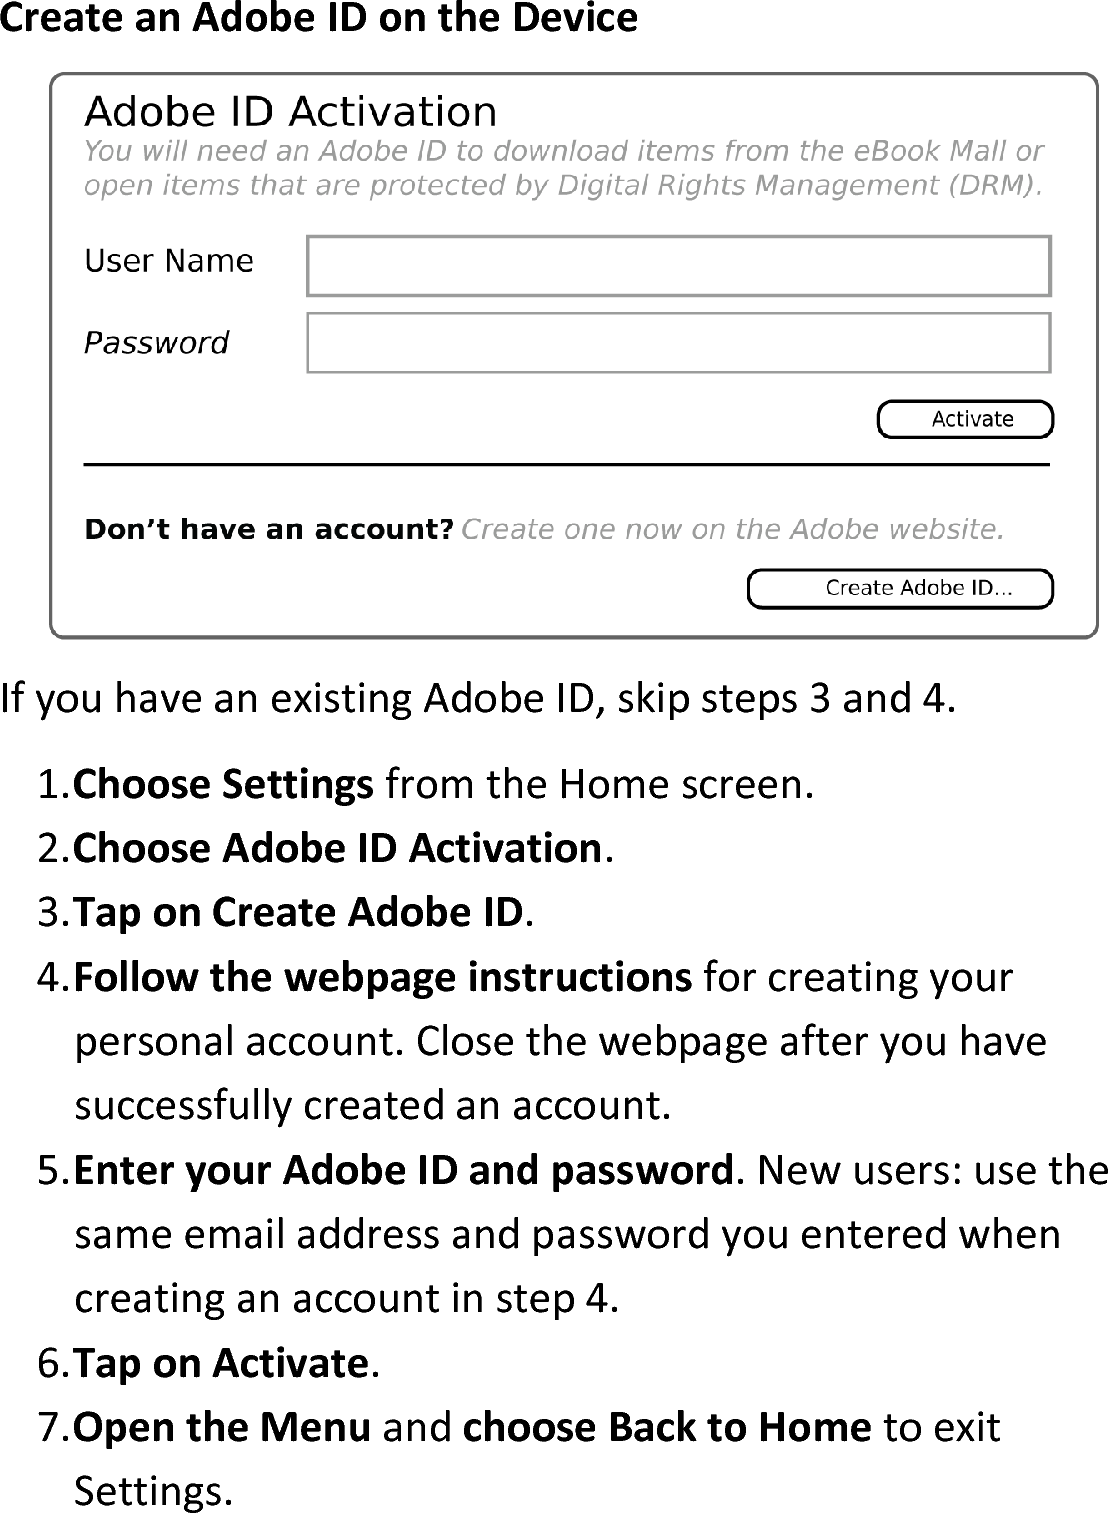 Create an Adobe ID on the DeviceIf you have an existing Adobe ID, skip steps 3 and 4.1.Choose Settings from the Home screen.2.Choose Adobe ID Activation.3.Tap on Create Adobe ID.4.Follow the webpage instructions for creating your personal account. Close the webpage after you have successfully created an account.5.Enter your Adobe ID and password. New users: use the same email address and password you entered when creating an account in step 4.6.Tap on Activate.7.Open the Menu and choose Back to Home to exit Settings.